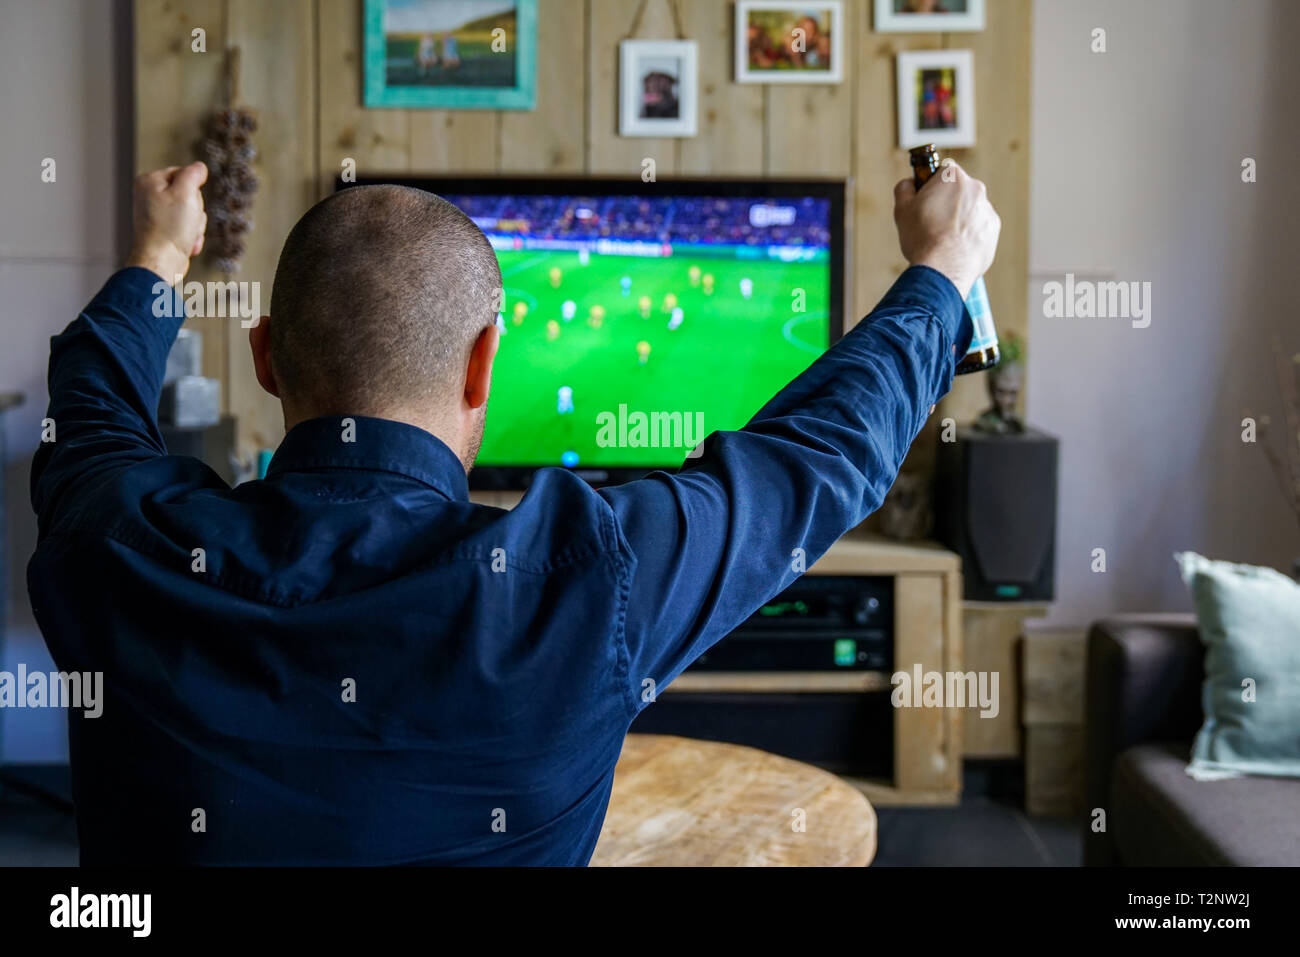 watching an important soccer match at home. Man on the couch is cheering for his favorite team Stock Photo